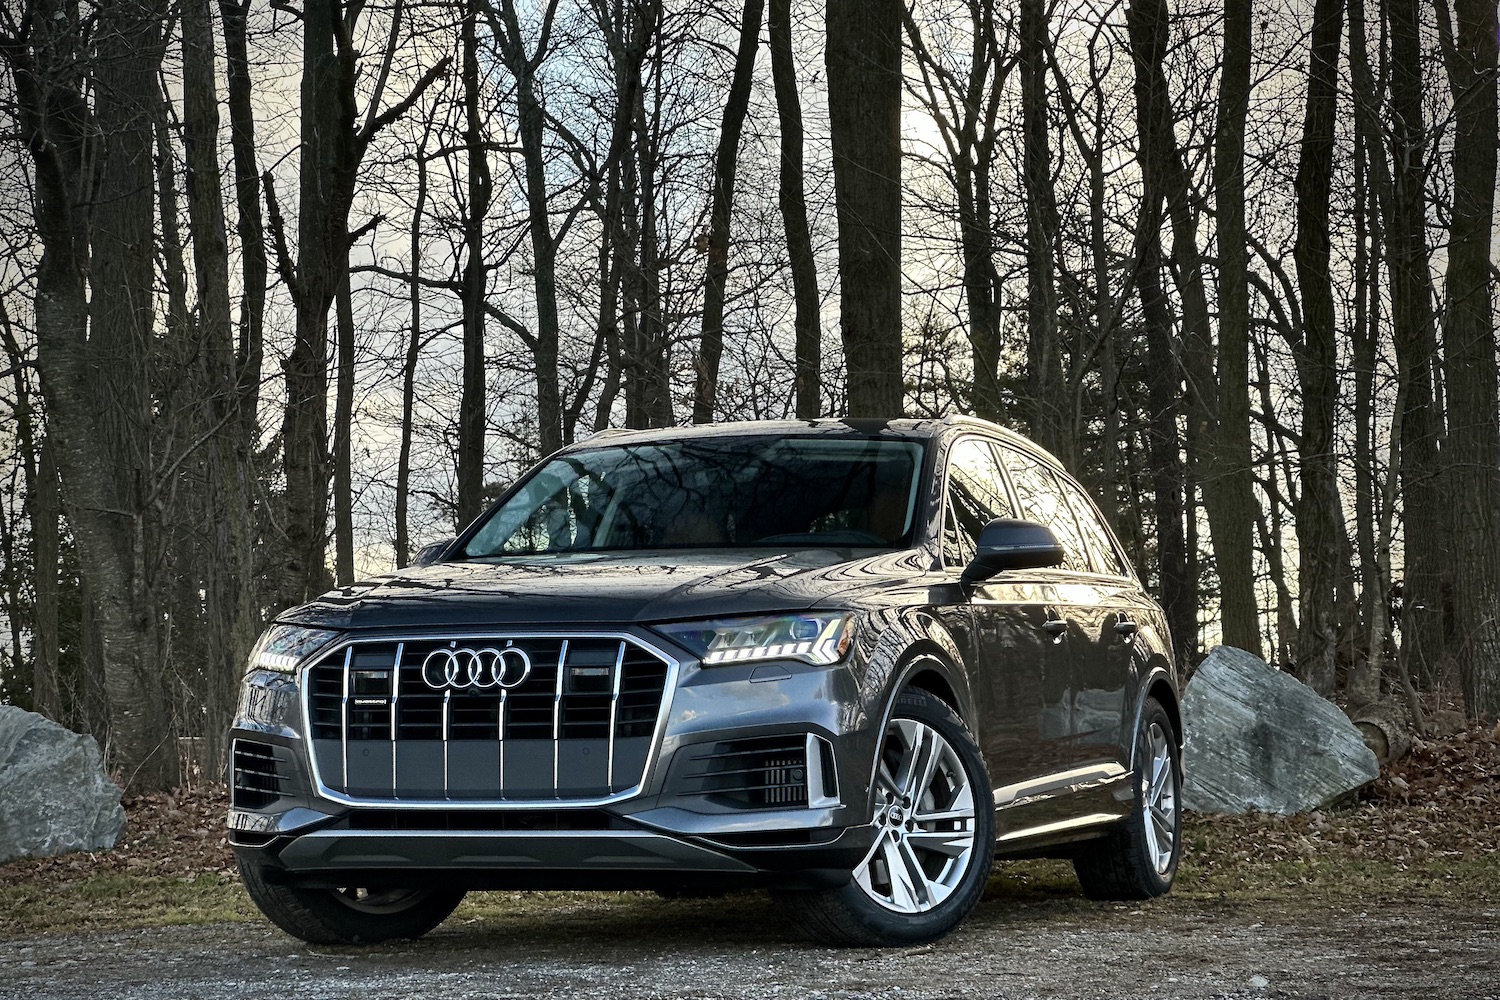 Front end angle of the 2022 Audi Q7 Prestige from driver's side parked in front of trees.